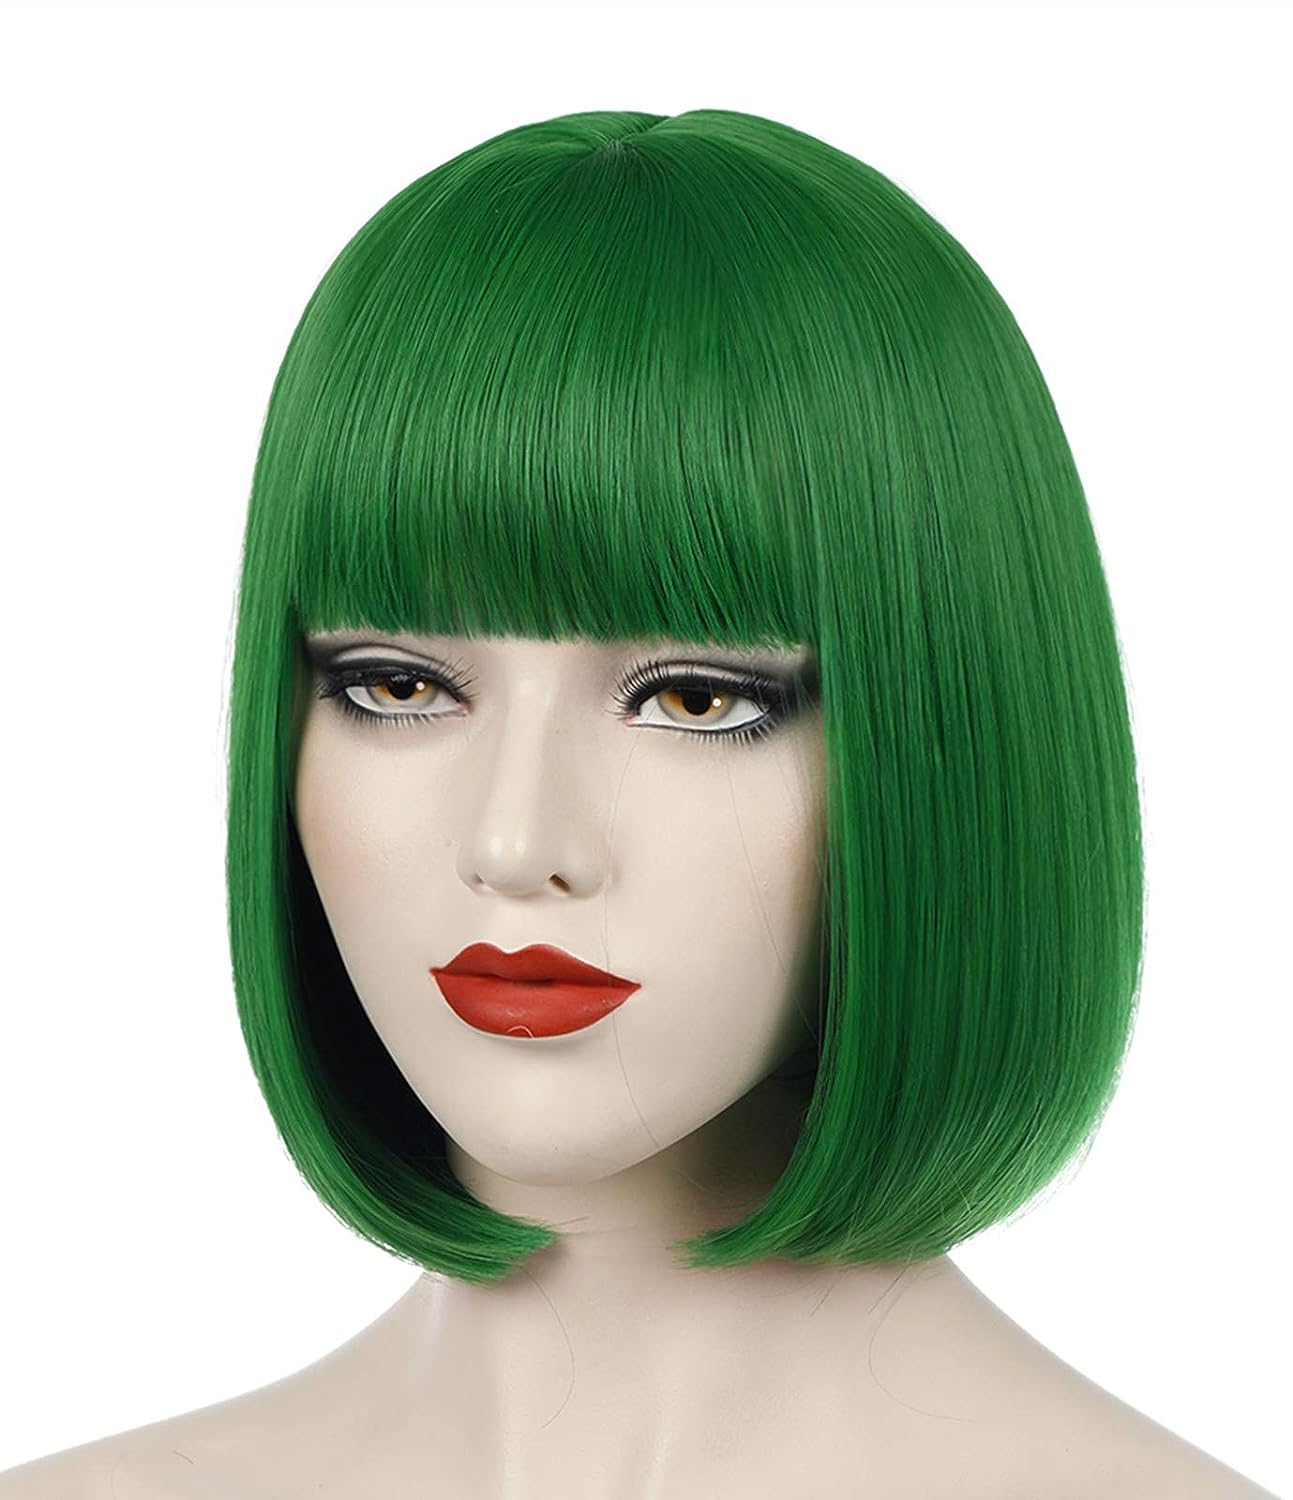 KELLY GREEN BOB 12in'' Wig Short Straight Wigs Bangs Natural Looking Synthetic Soft Headpiece for Halloween Costume, St Patricks, Party Gift - Asylum Books